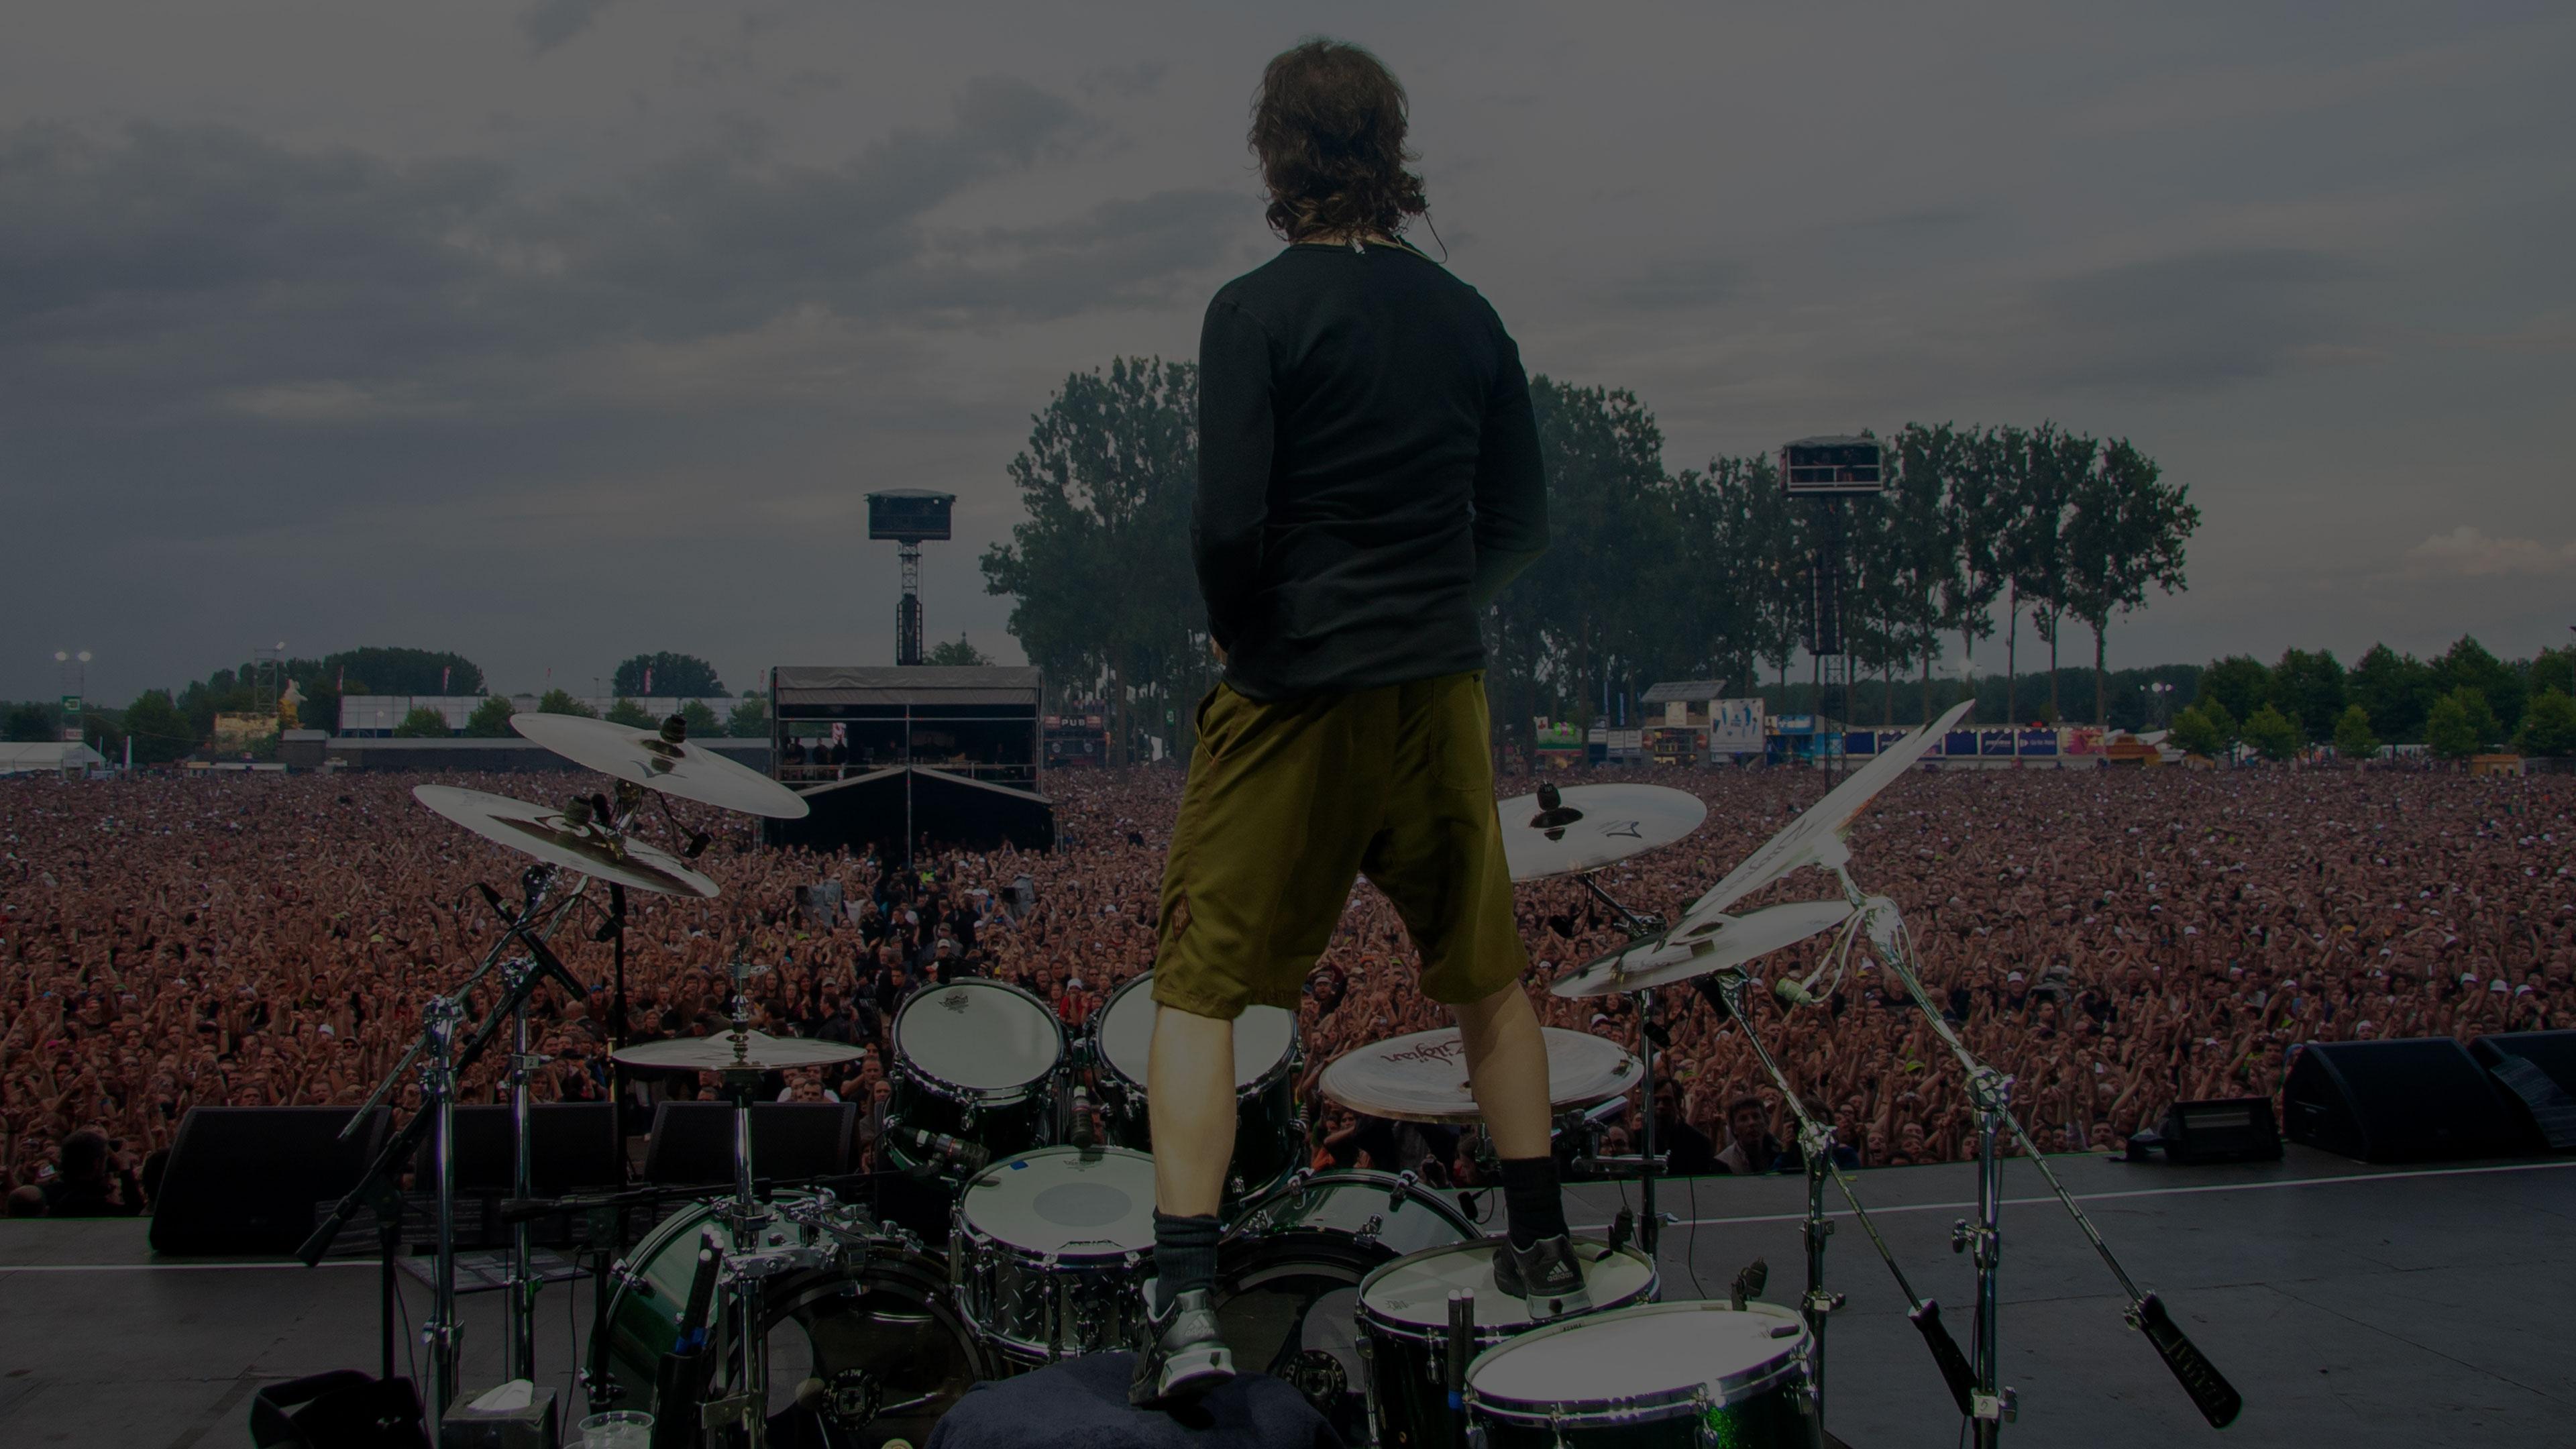 Banner Image for the photo gallery from the gig in Werchter, Belgium shot on July 1, 2007